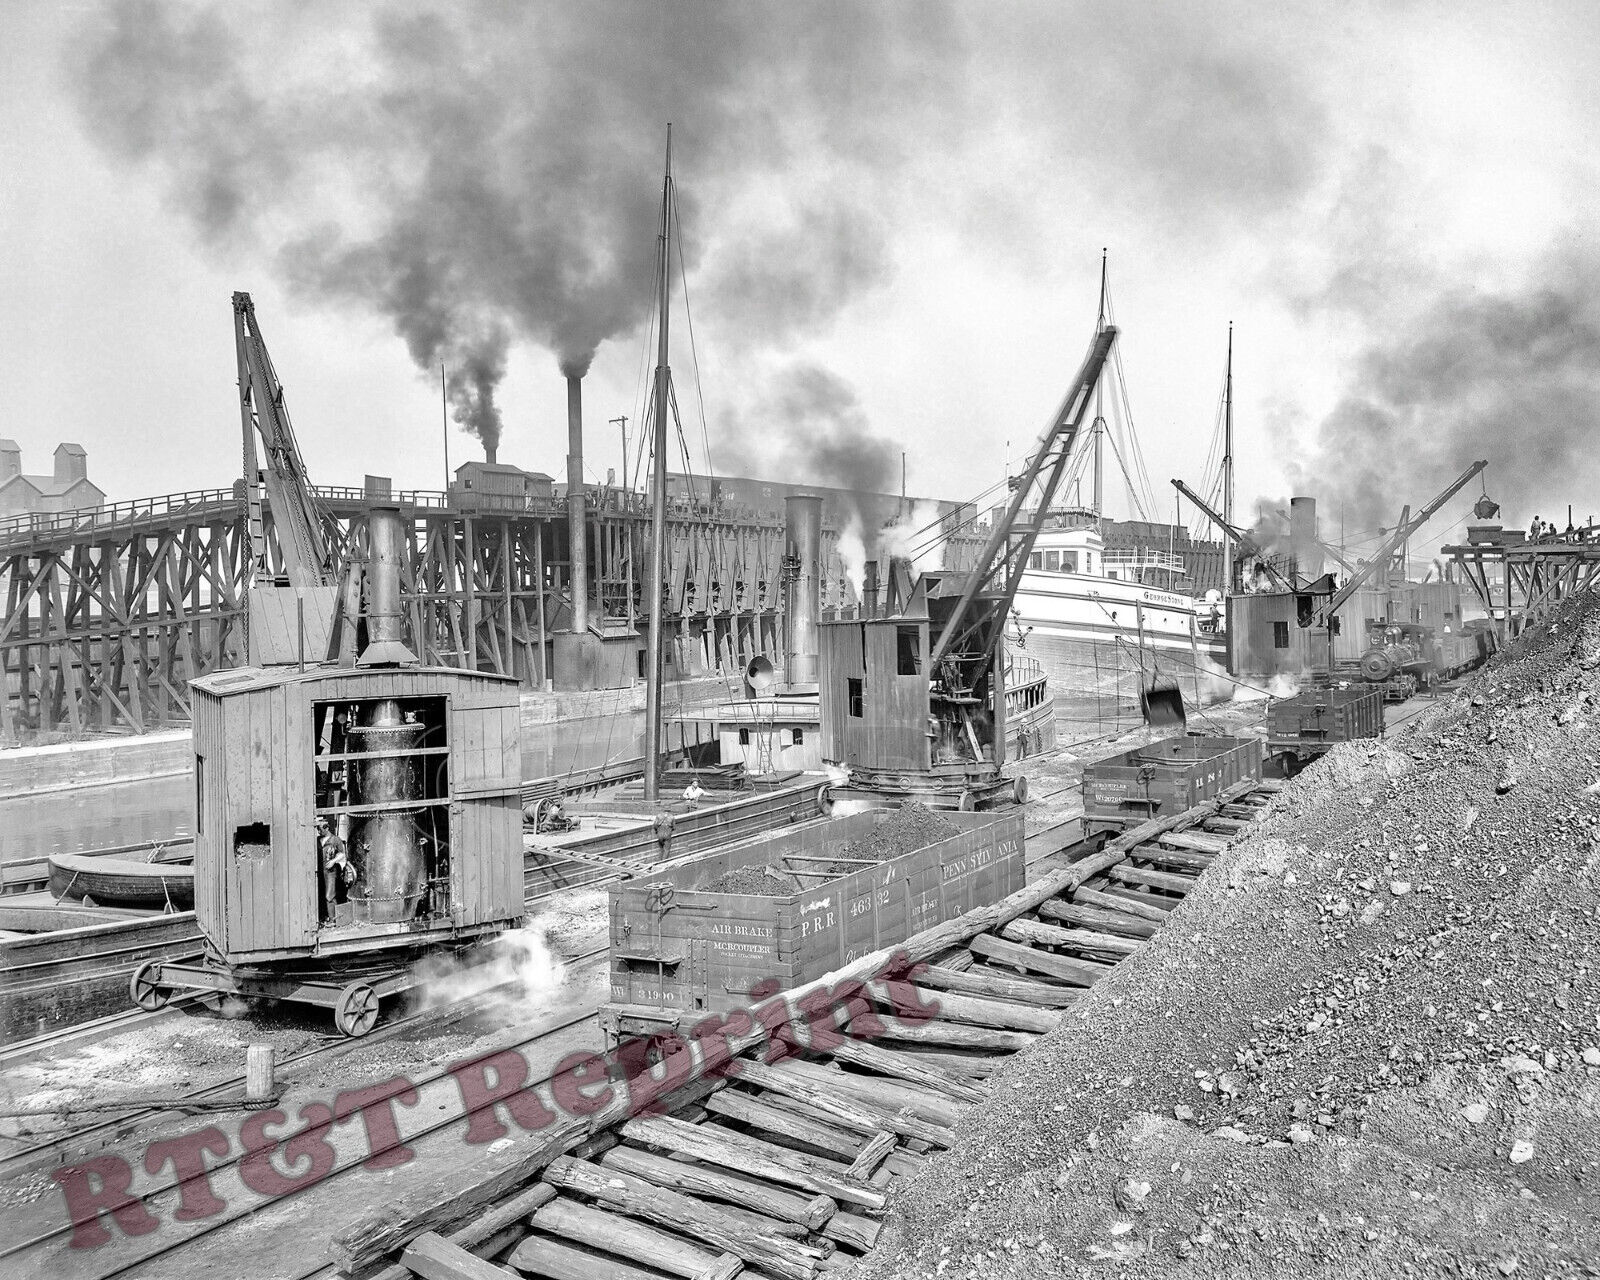 Whirleys Unloading Ore Freighter George Stone Erie Pennsylvania Year 1900c Photo